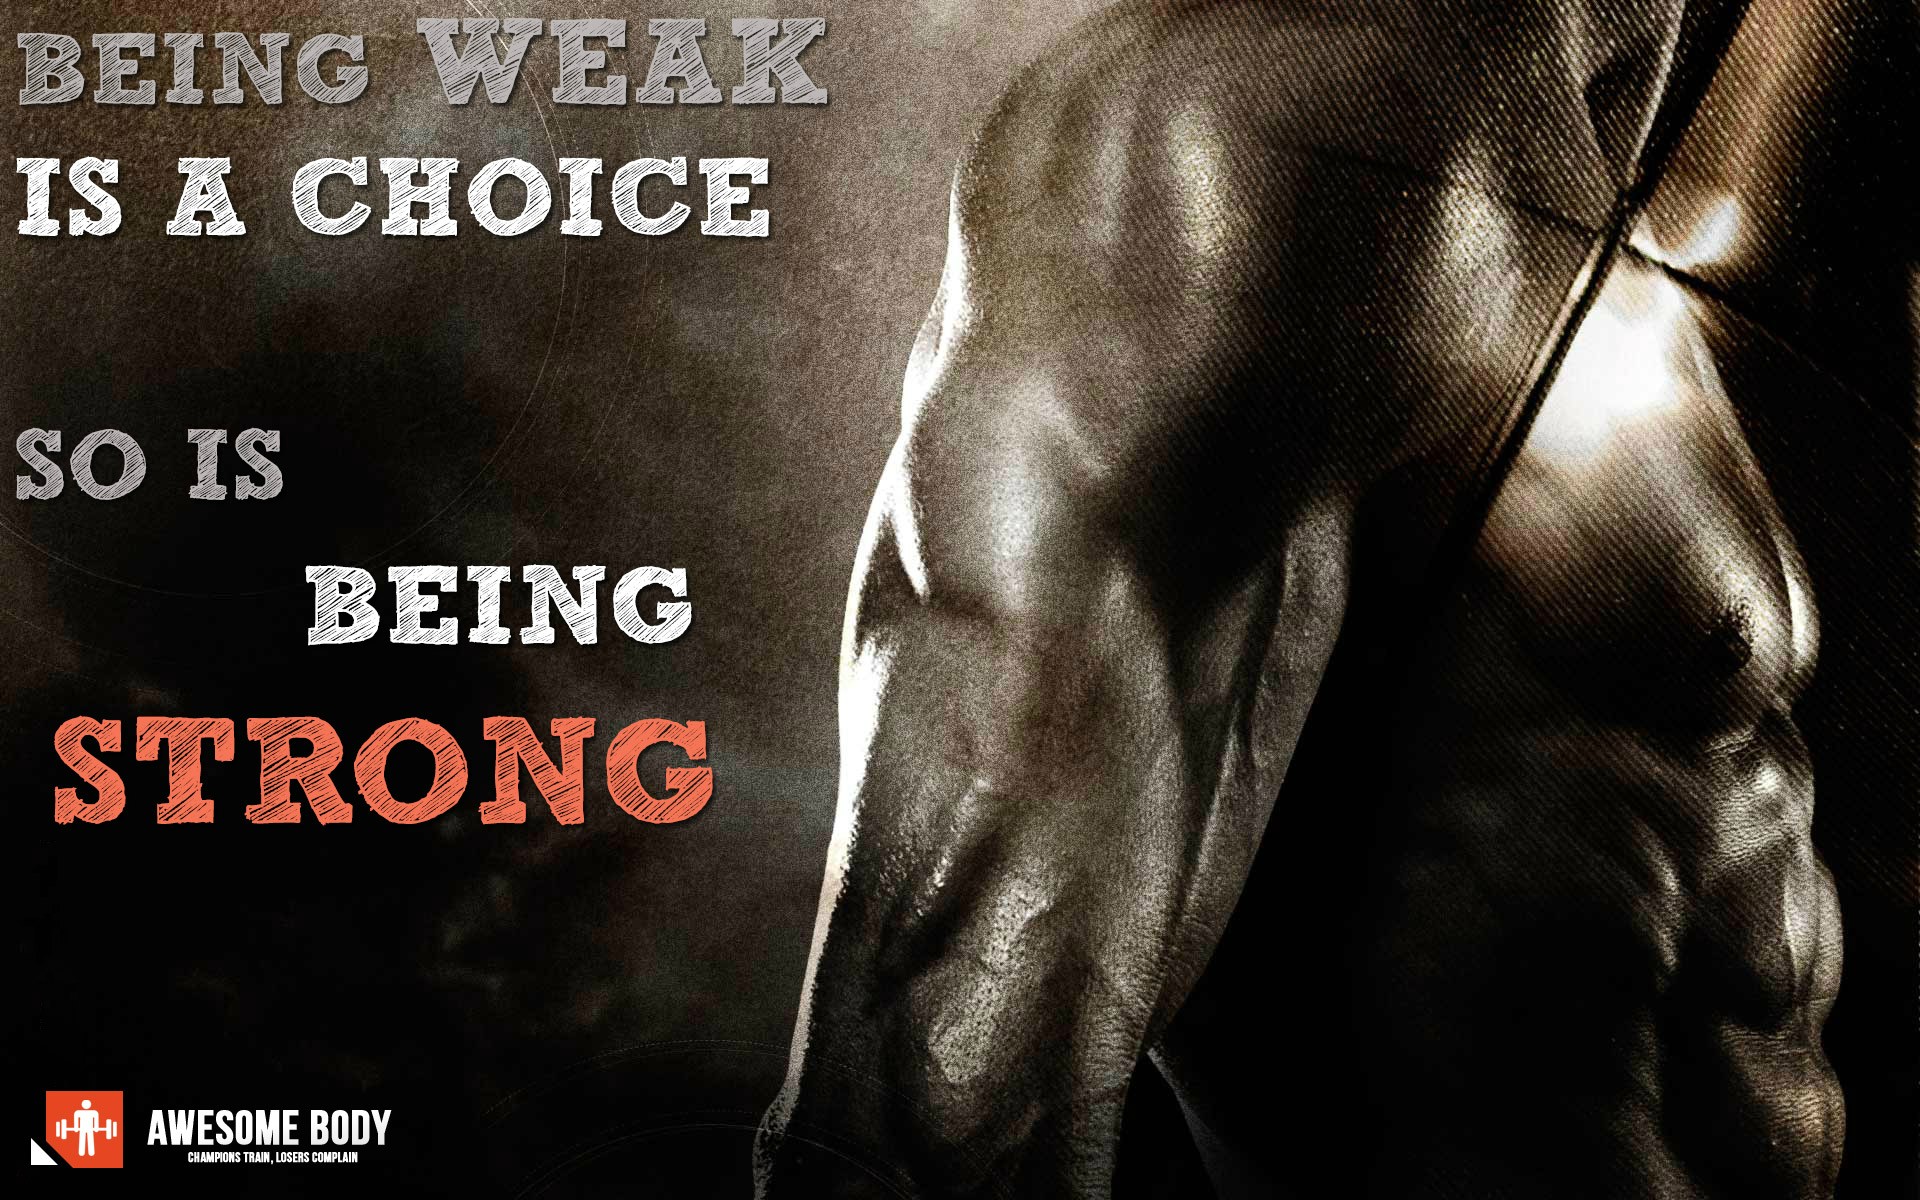 Bodybuilding Motivation Wallpaper HD Being strong is choice